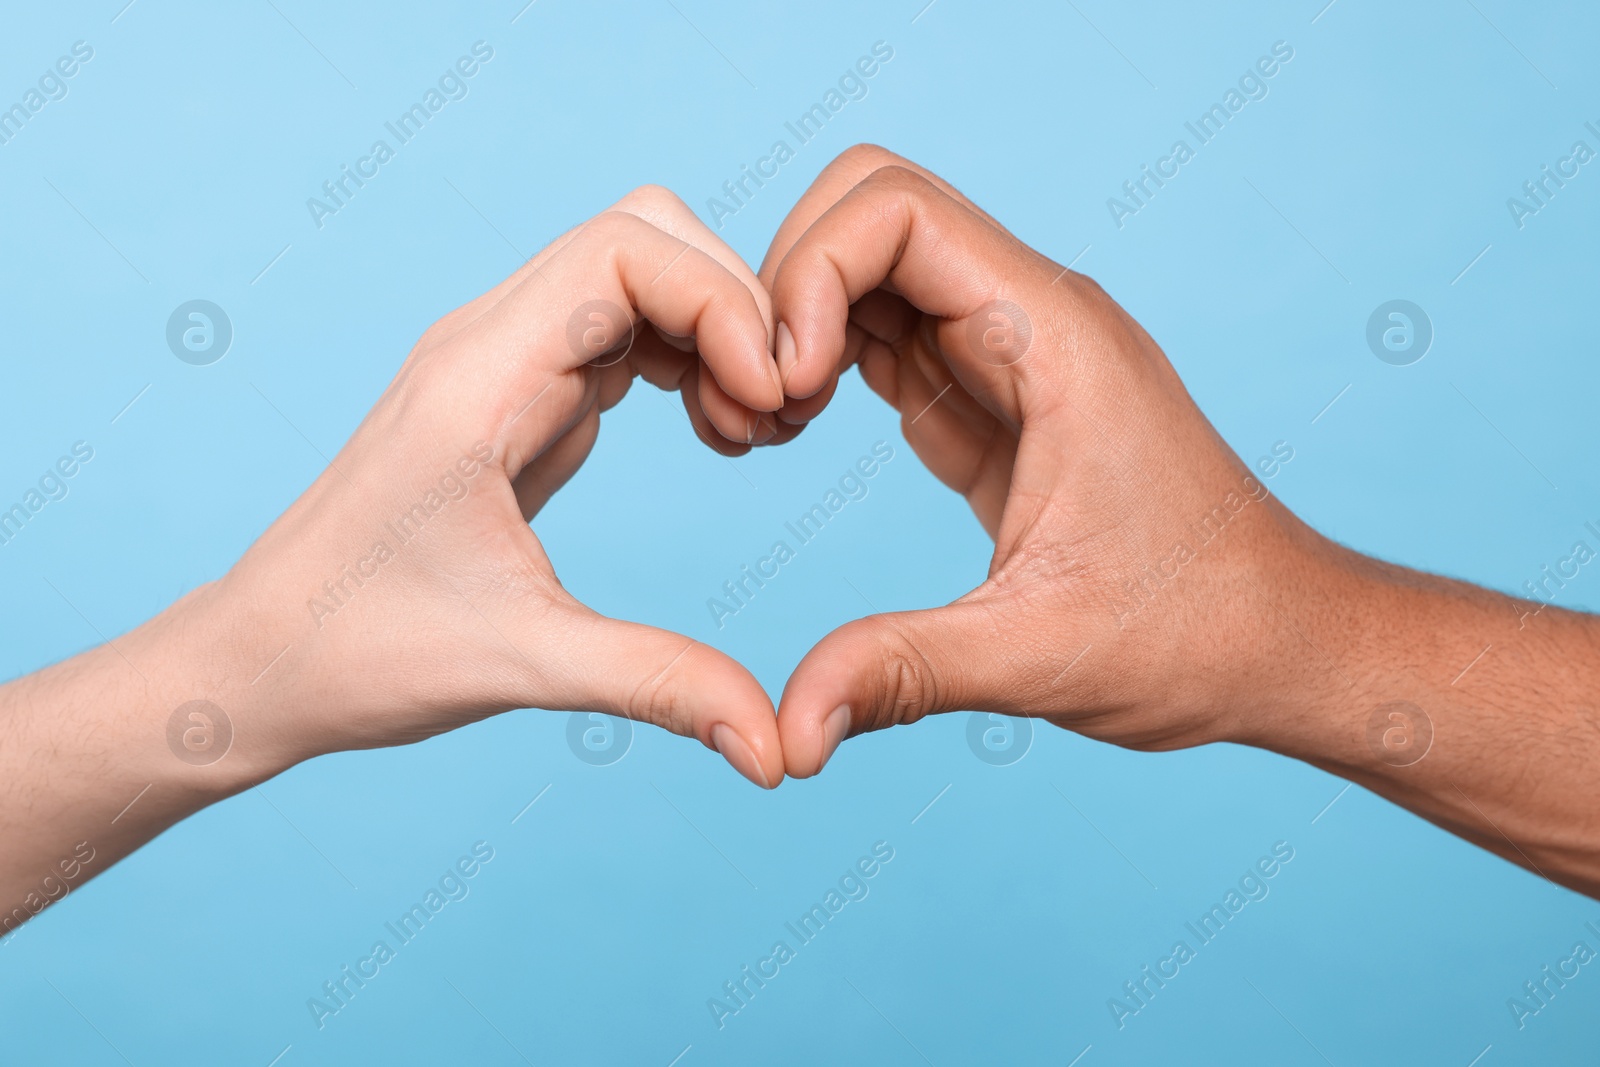 Photo of International relationships. People making heart with hands on light blue background, closeup